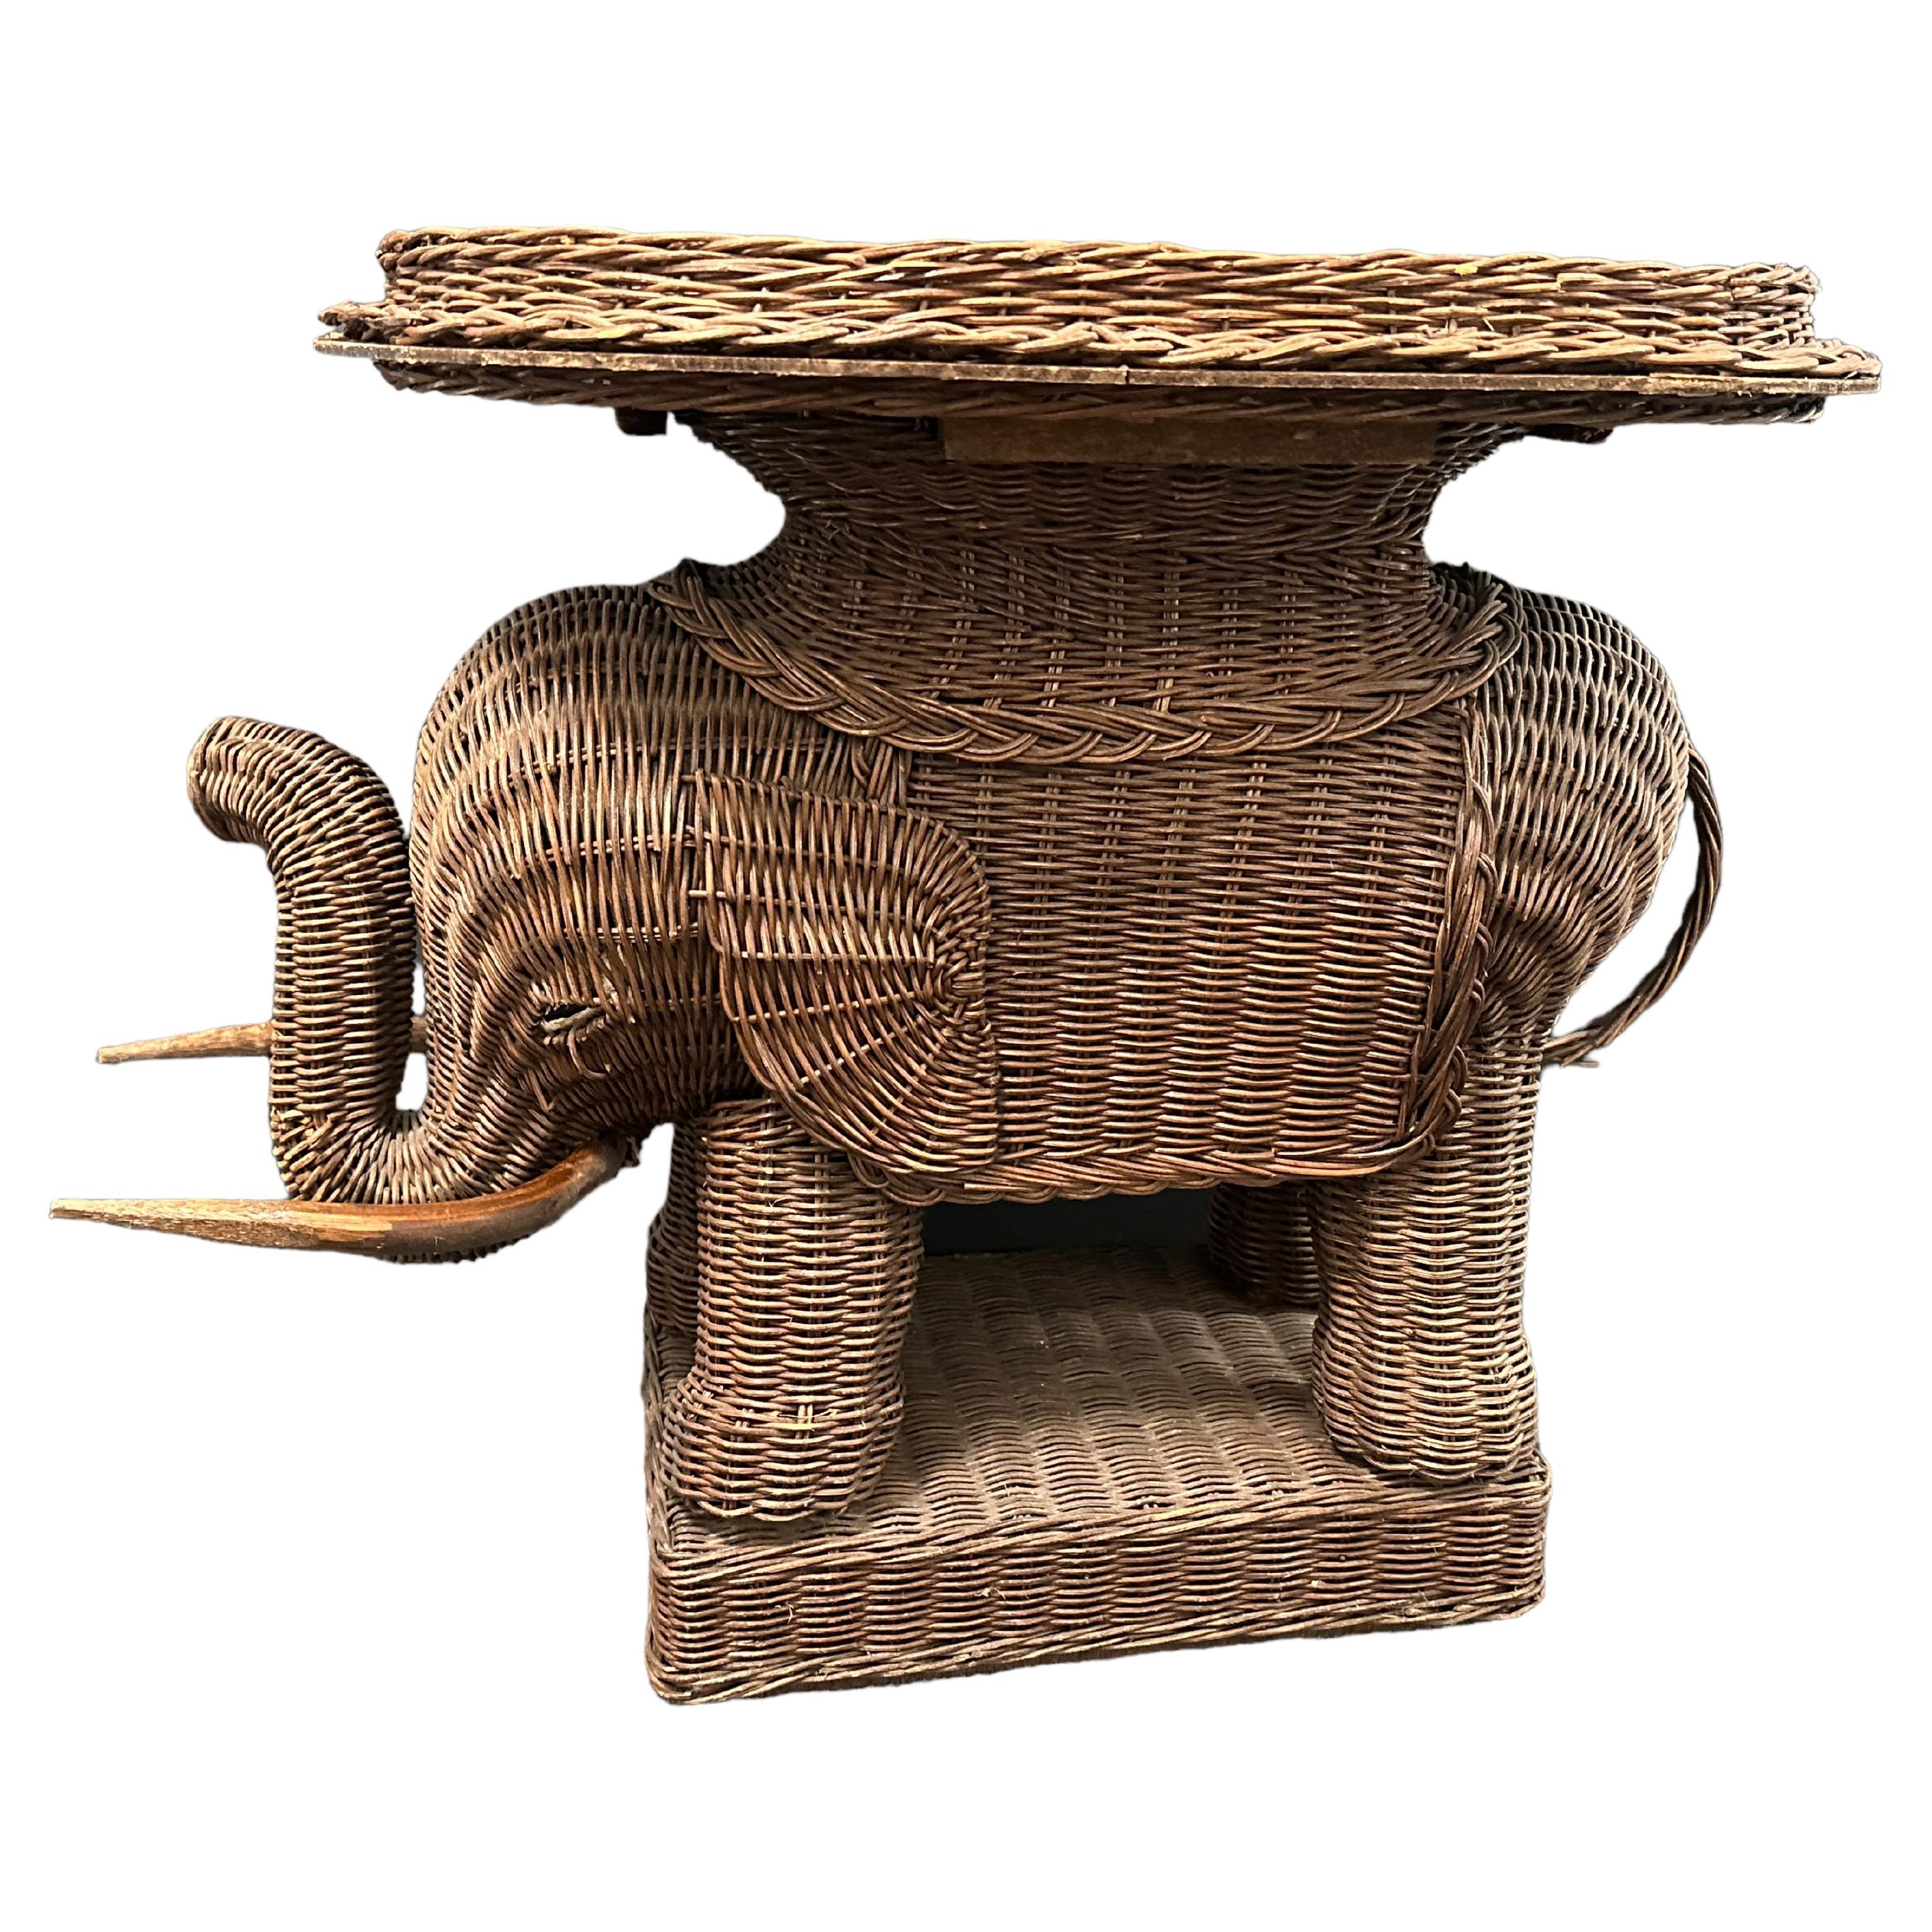 Stunning Rattan Wicker Elephant Side Table with Tray, France, 1960s For Sale